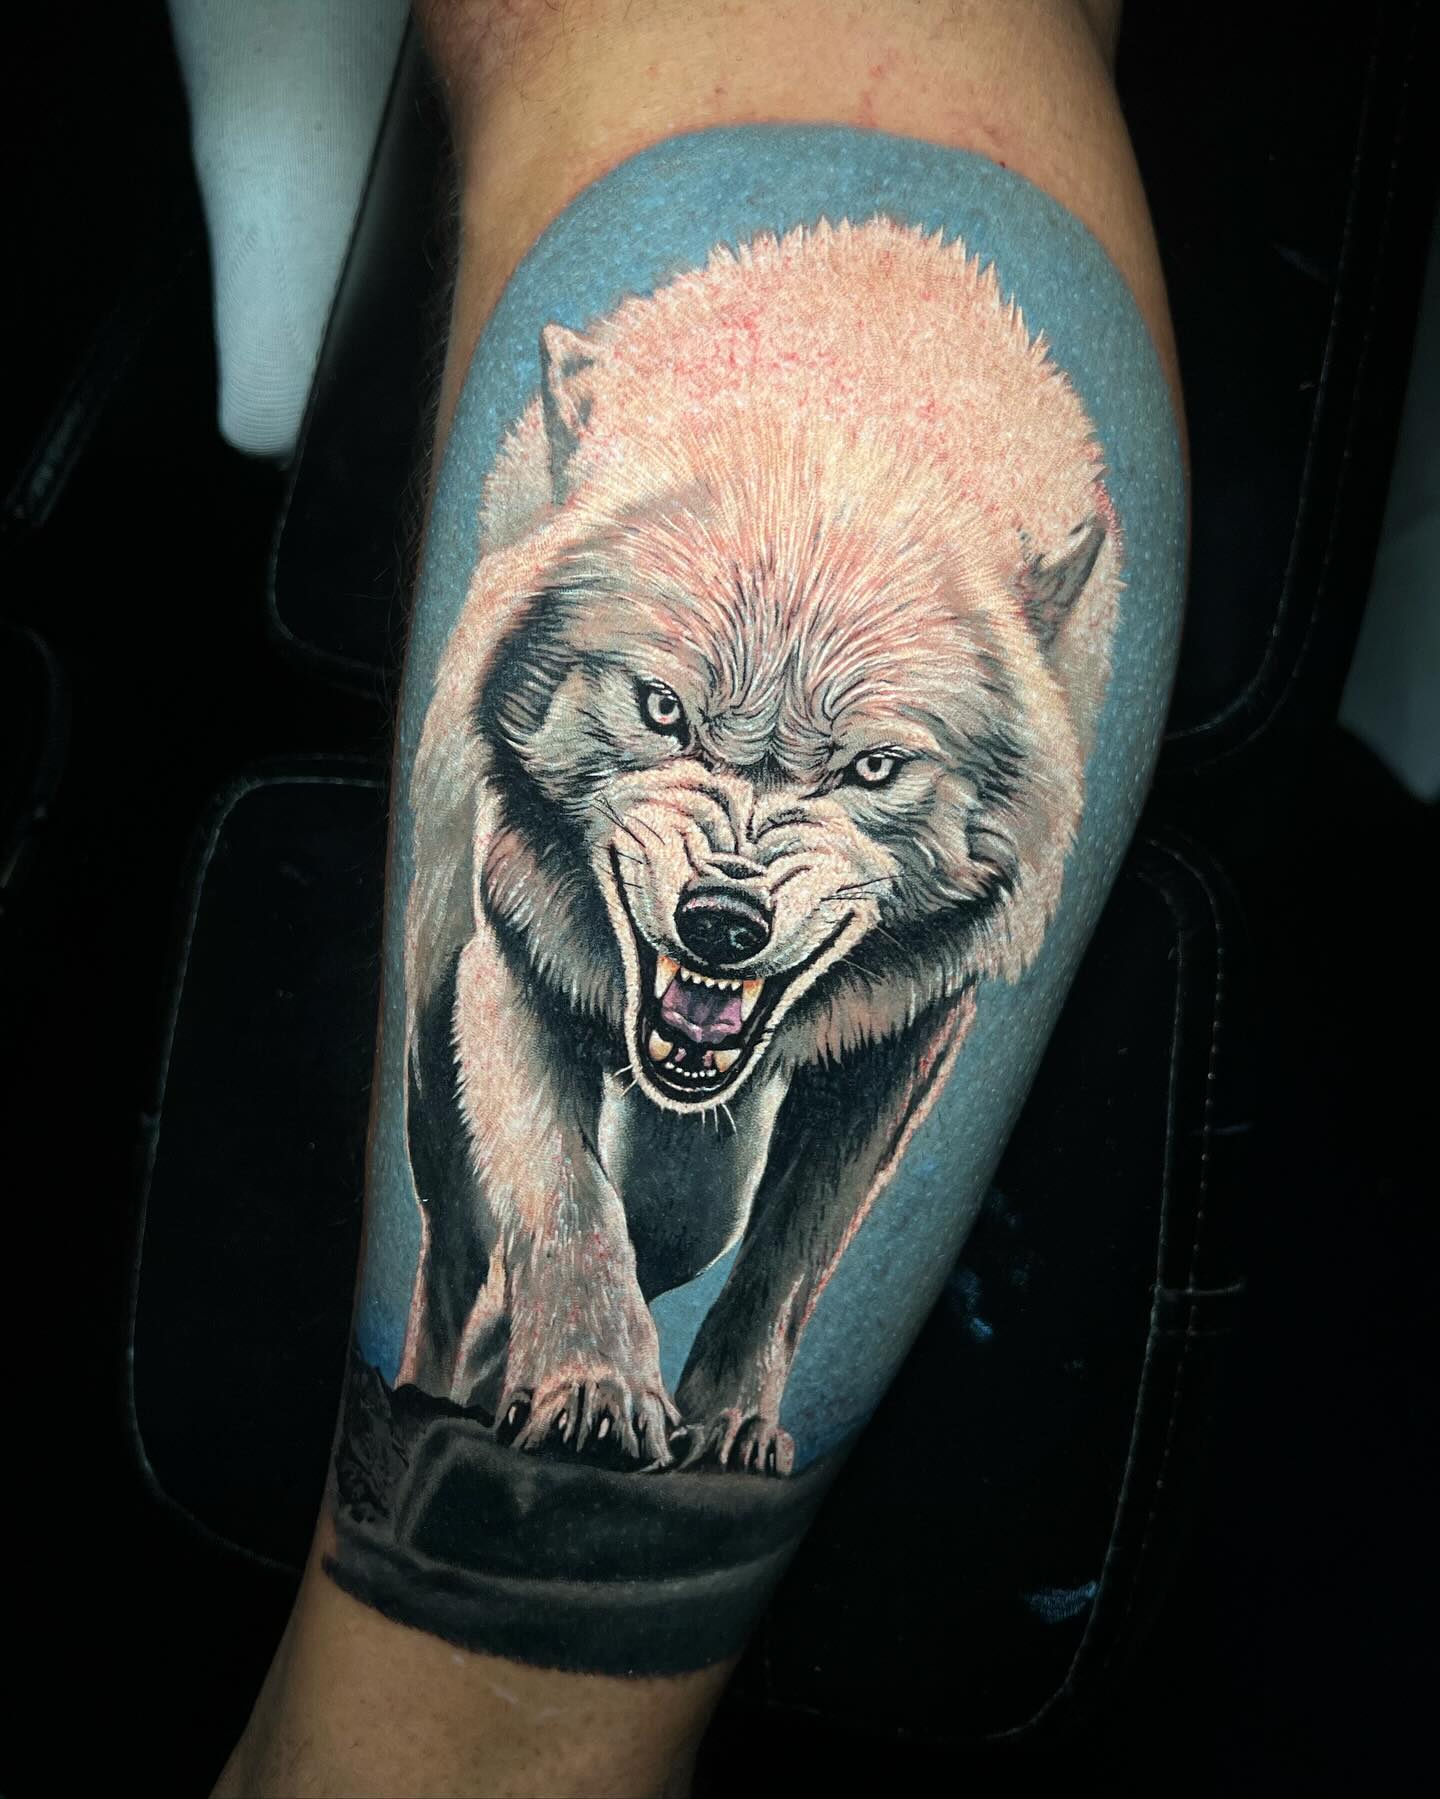 Howling at the Canvas: The Symbolism Behind 34 Wolf-Inspired Tattoos